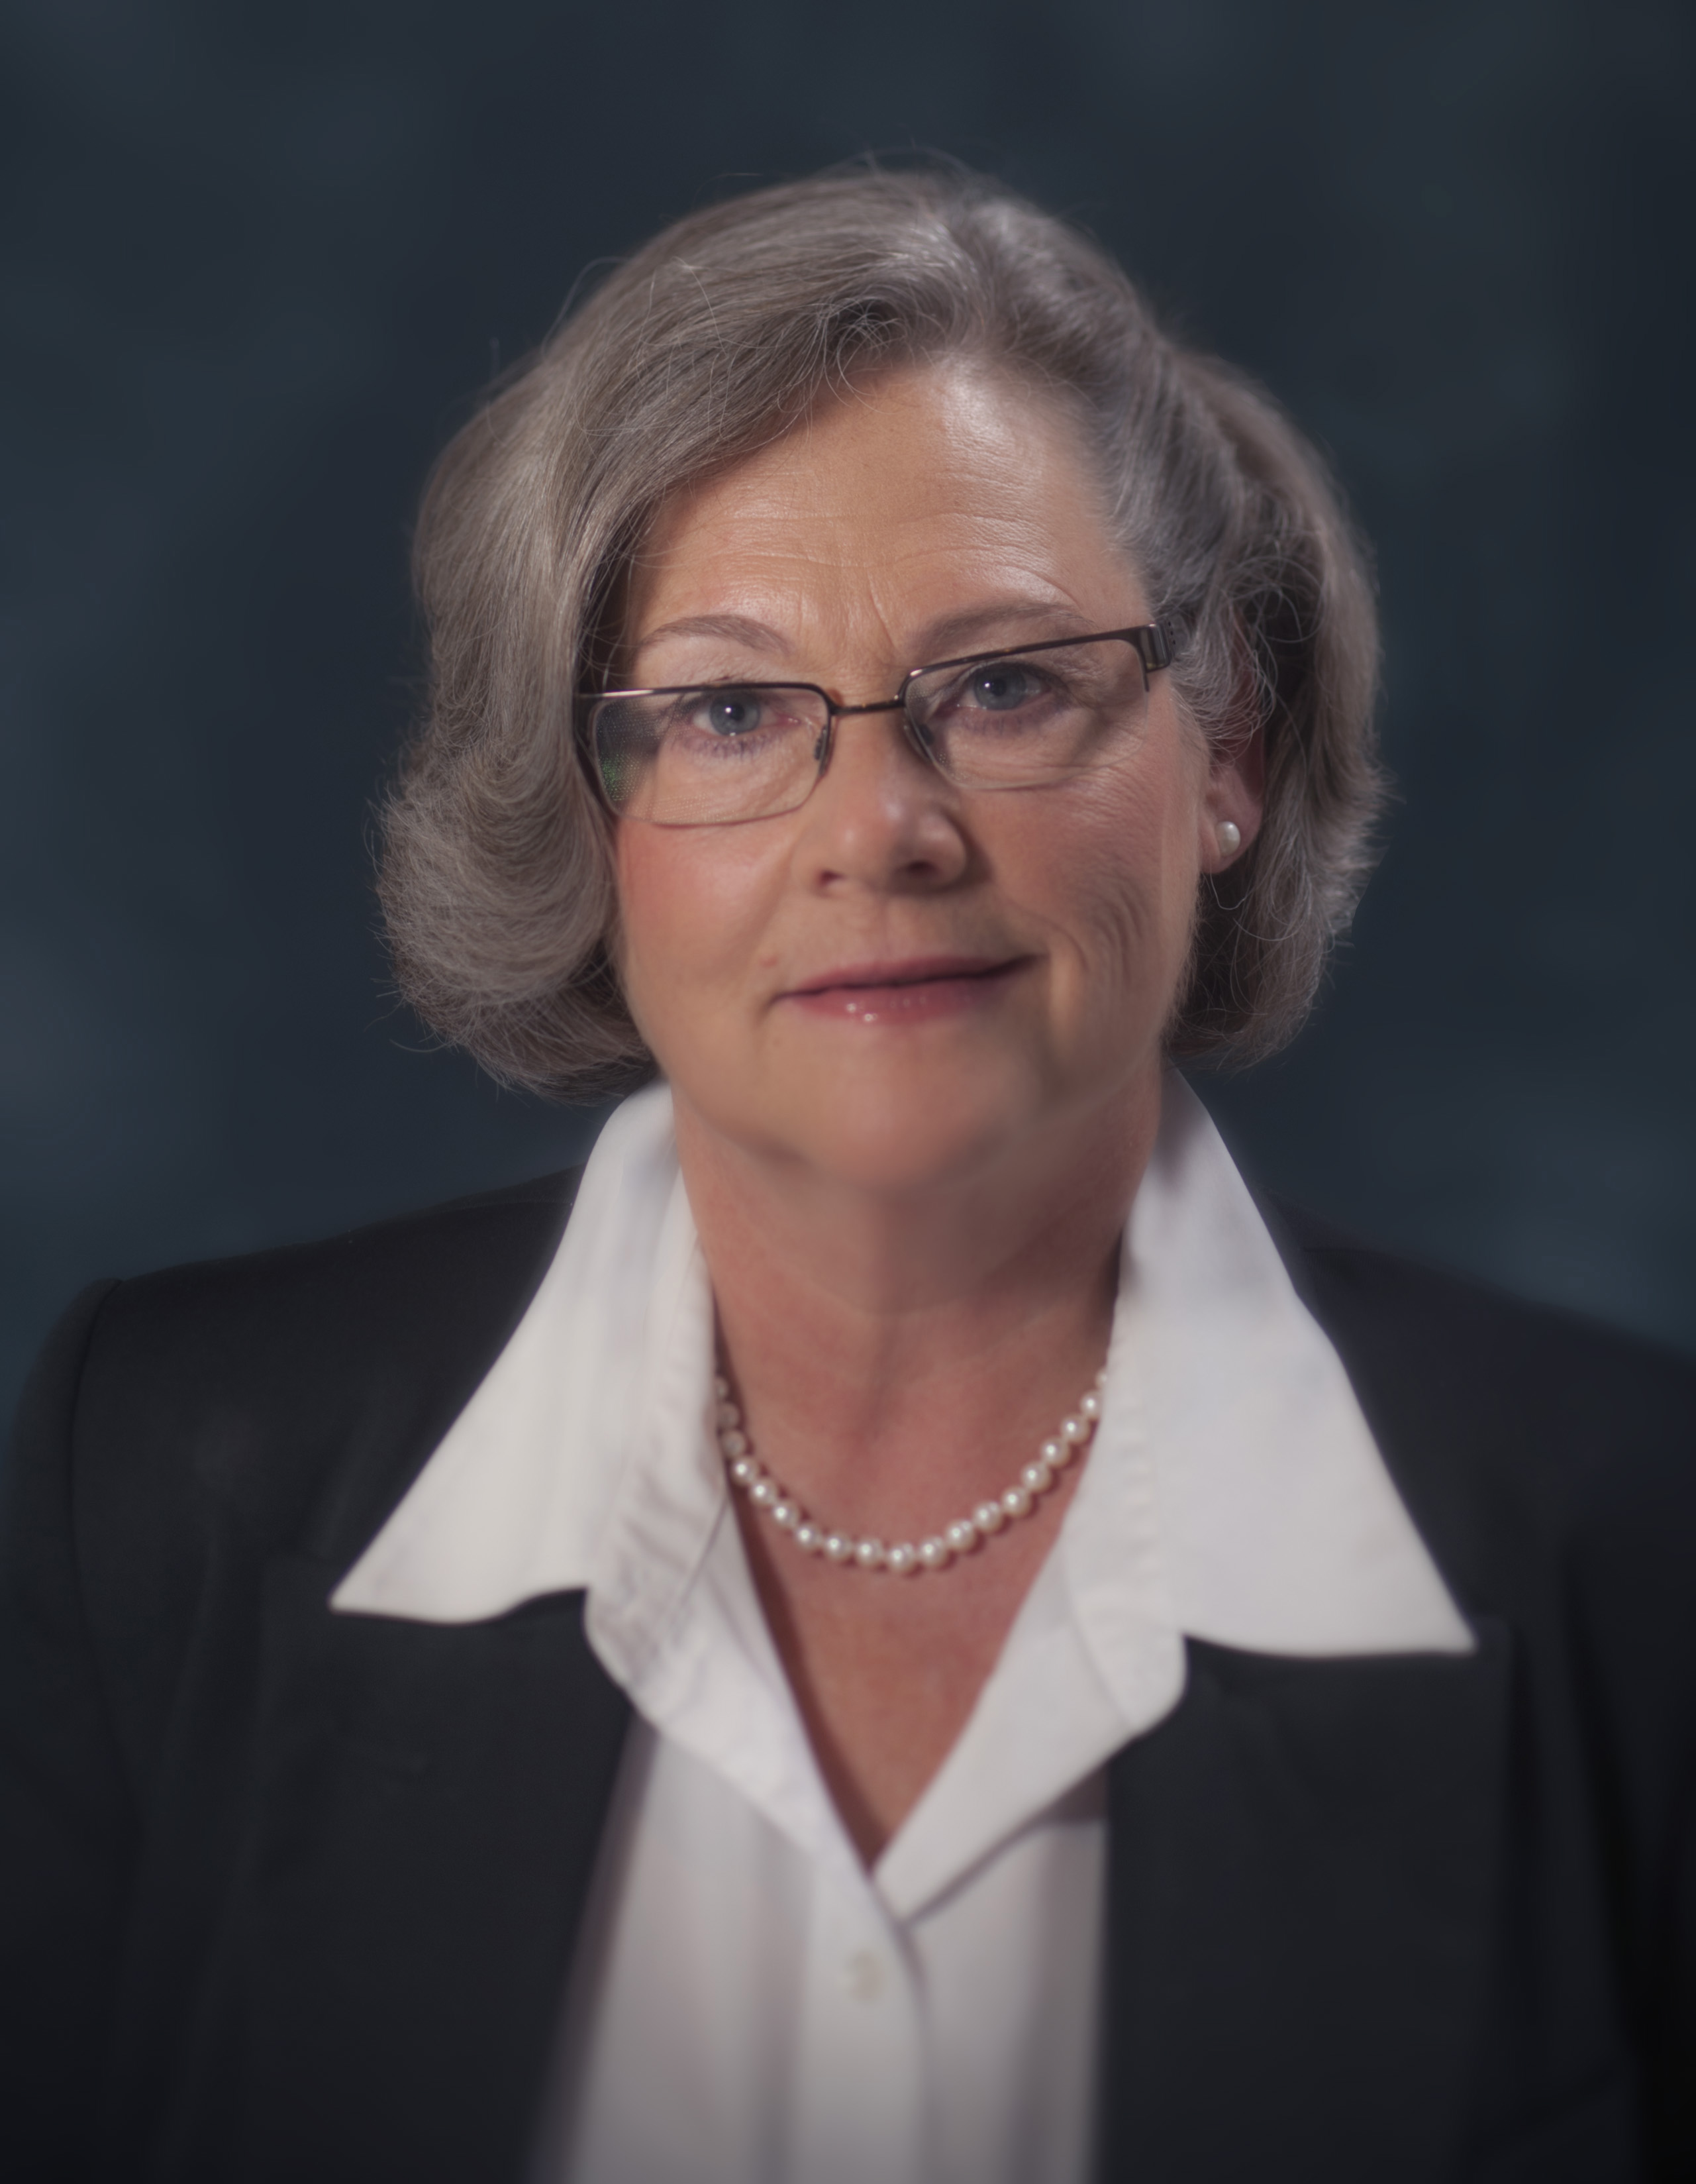 Dr. Patricia Bixel is the dean of Husson University's College of Science and Humanities.